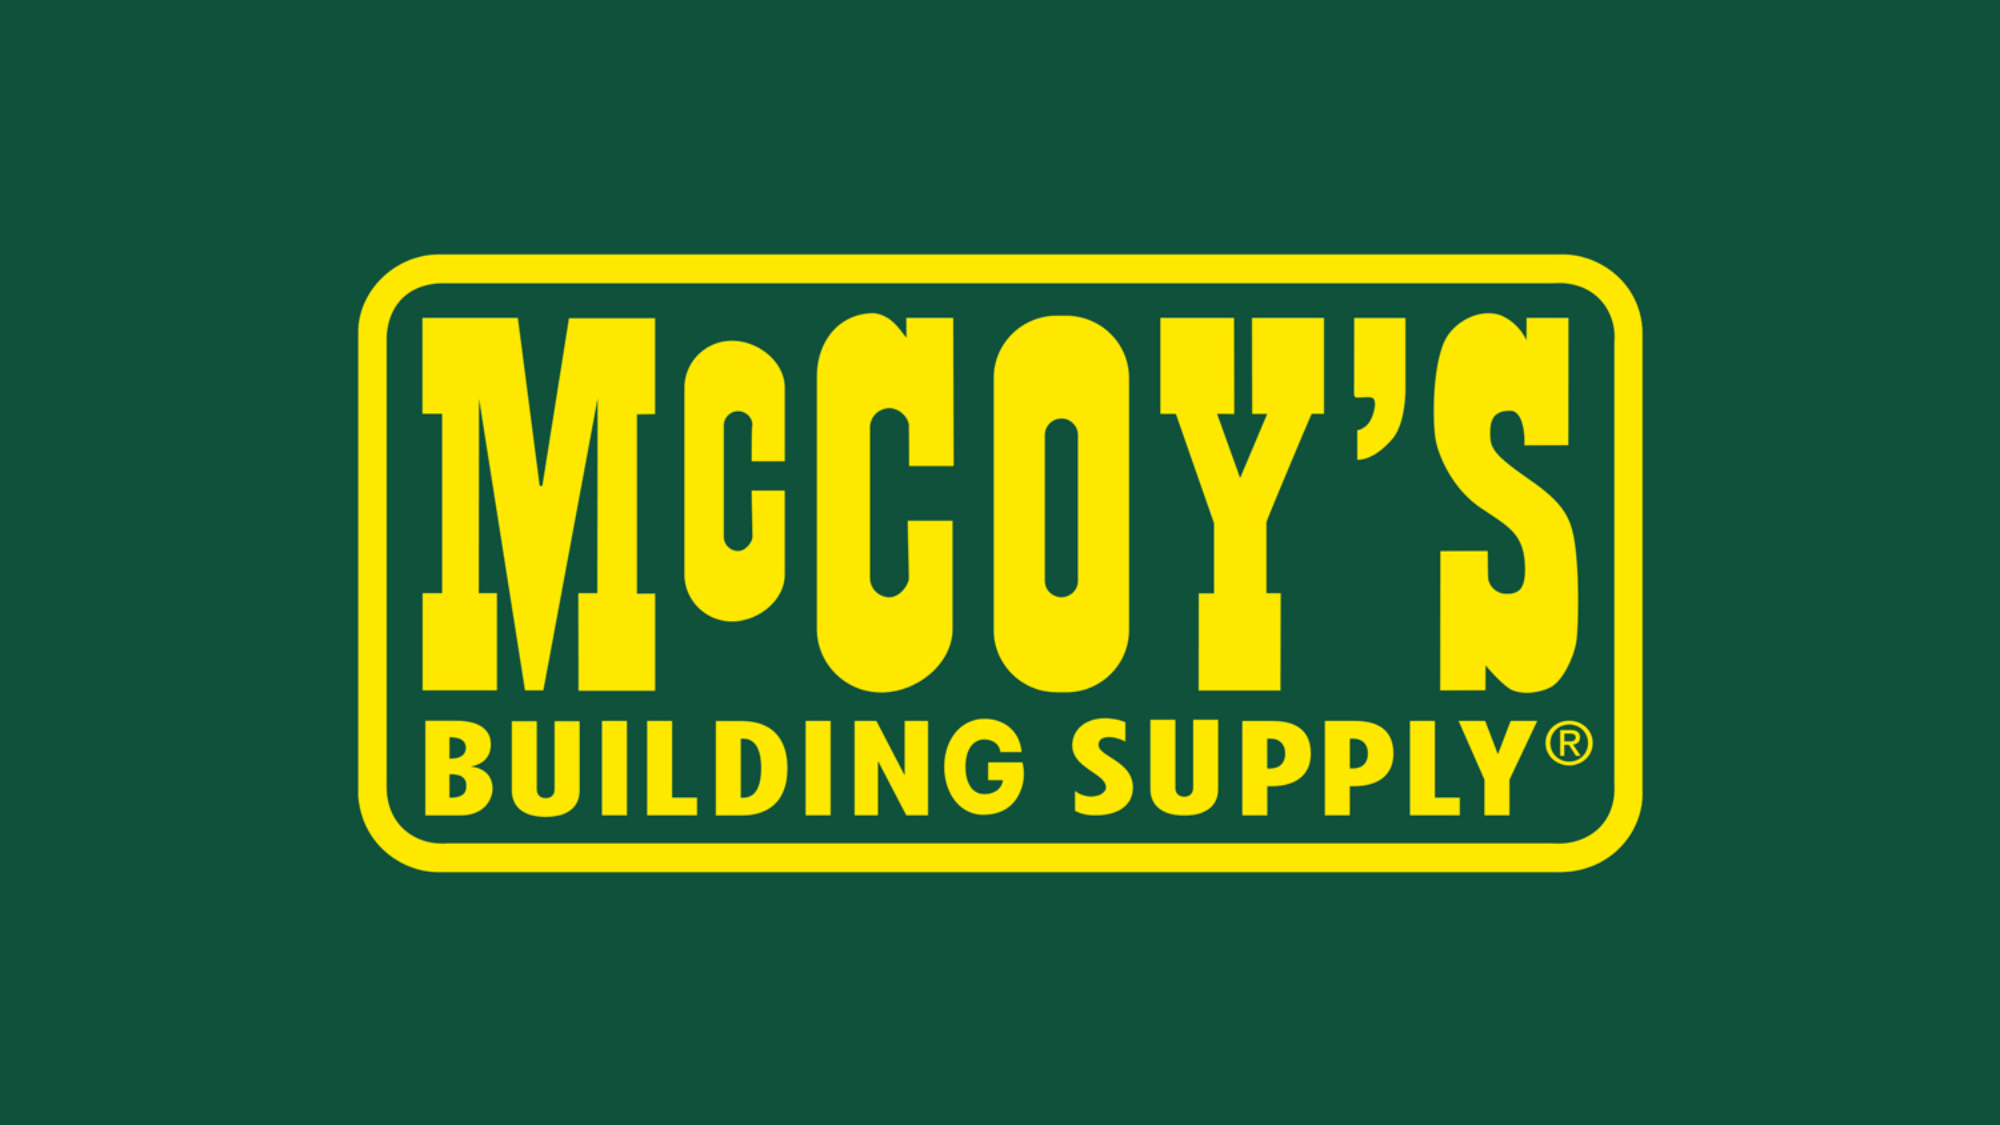 Read our comprehensive review of McCoy Building Supply and discover why they are a trusted name in the building materials industry. Explore their wide selection of building materials, top-notch customer service, and strong community involvement. For all your building supply needs, trust McCoy Building Supply as your reliable partner.